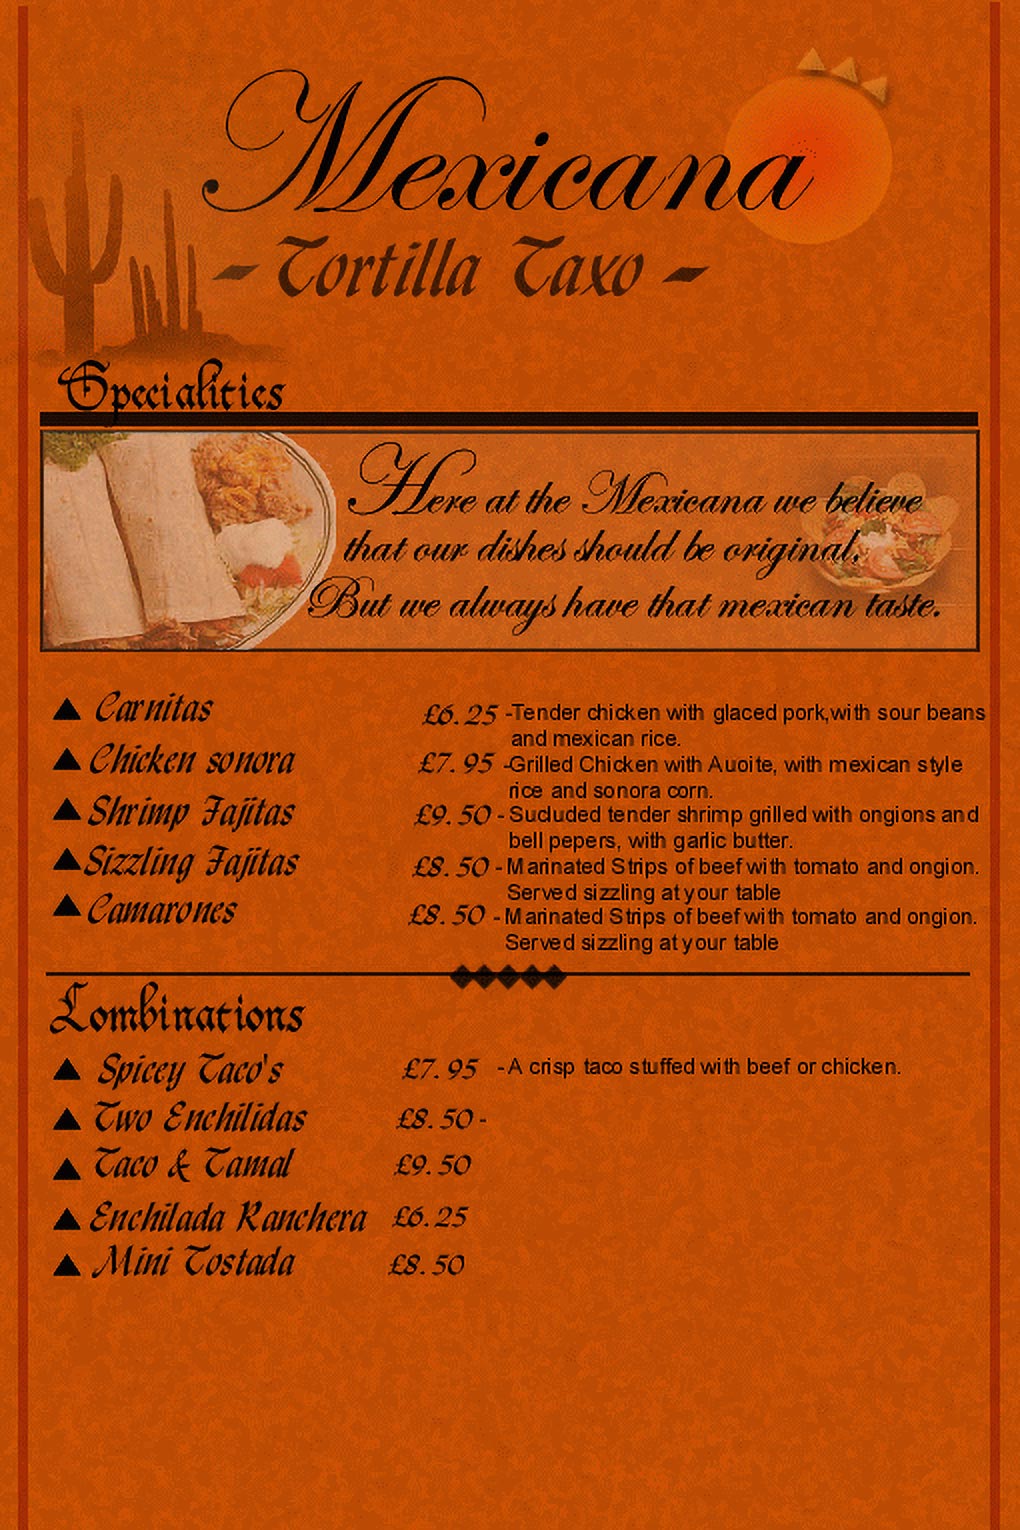 Mexicana menu made in Photoshop